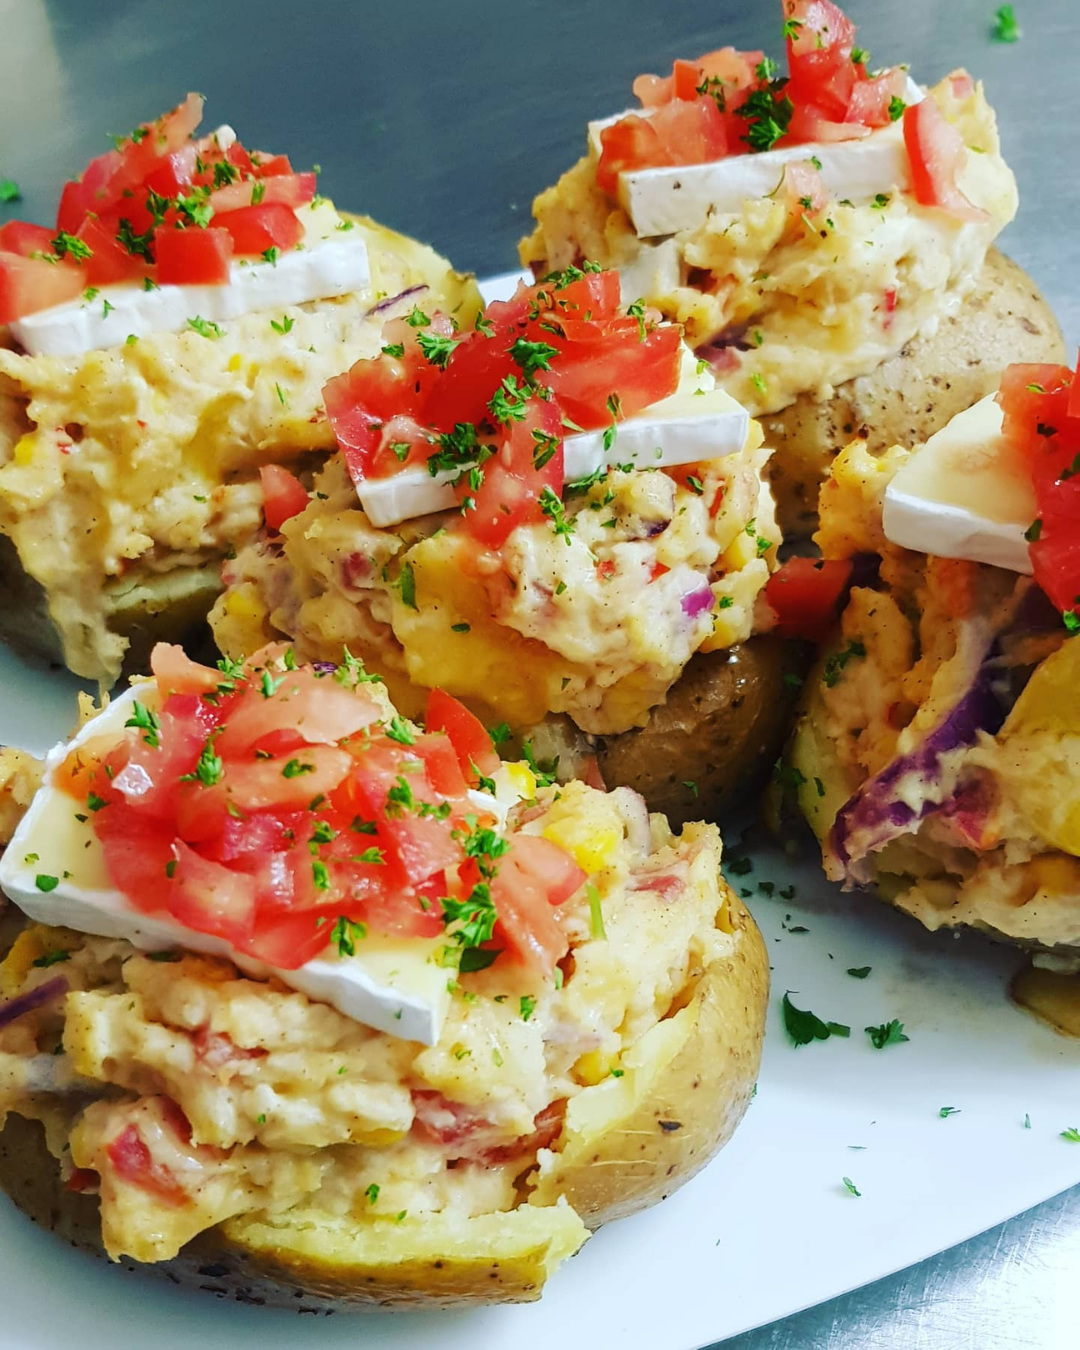 Tray of delicious carby loaded potato skins at Yaza cafe.